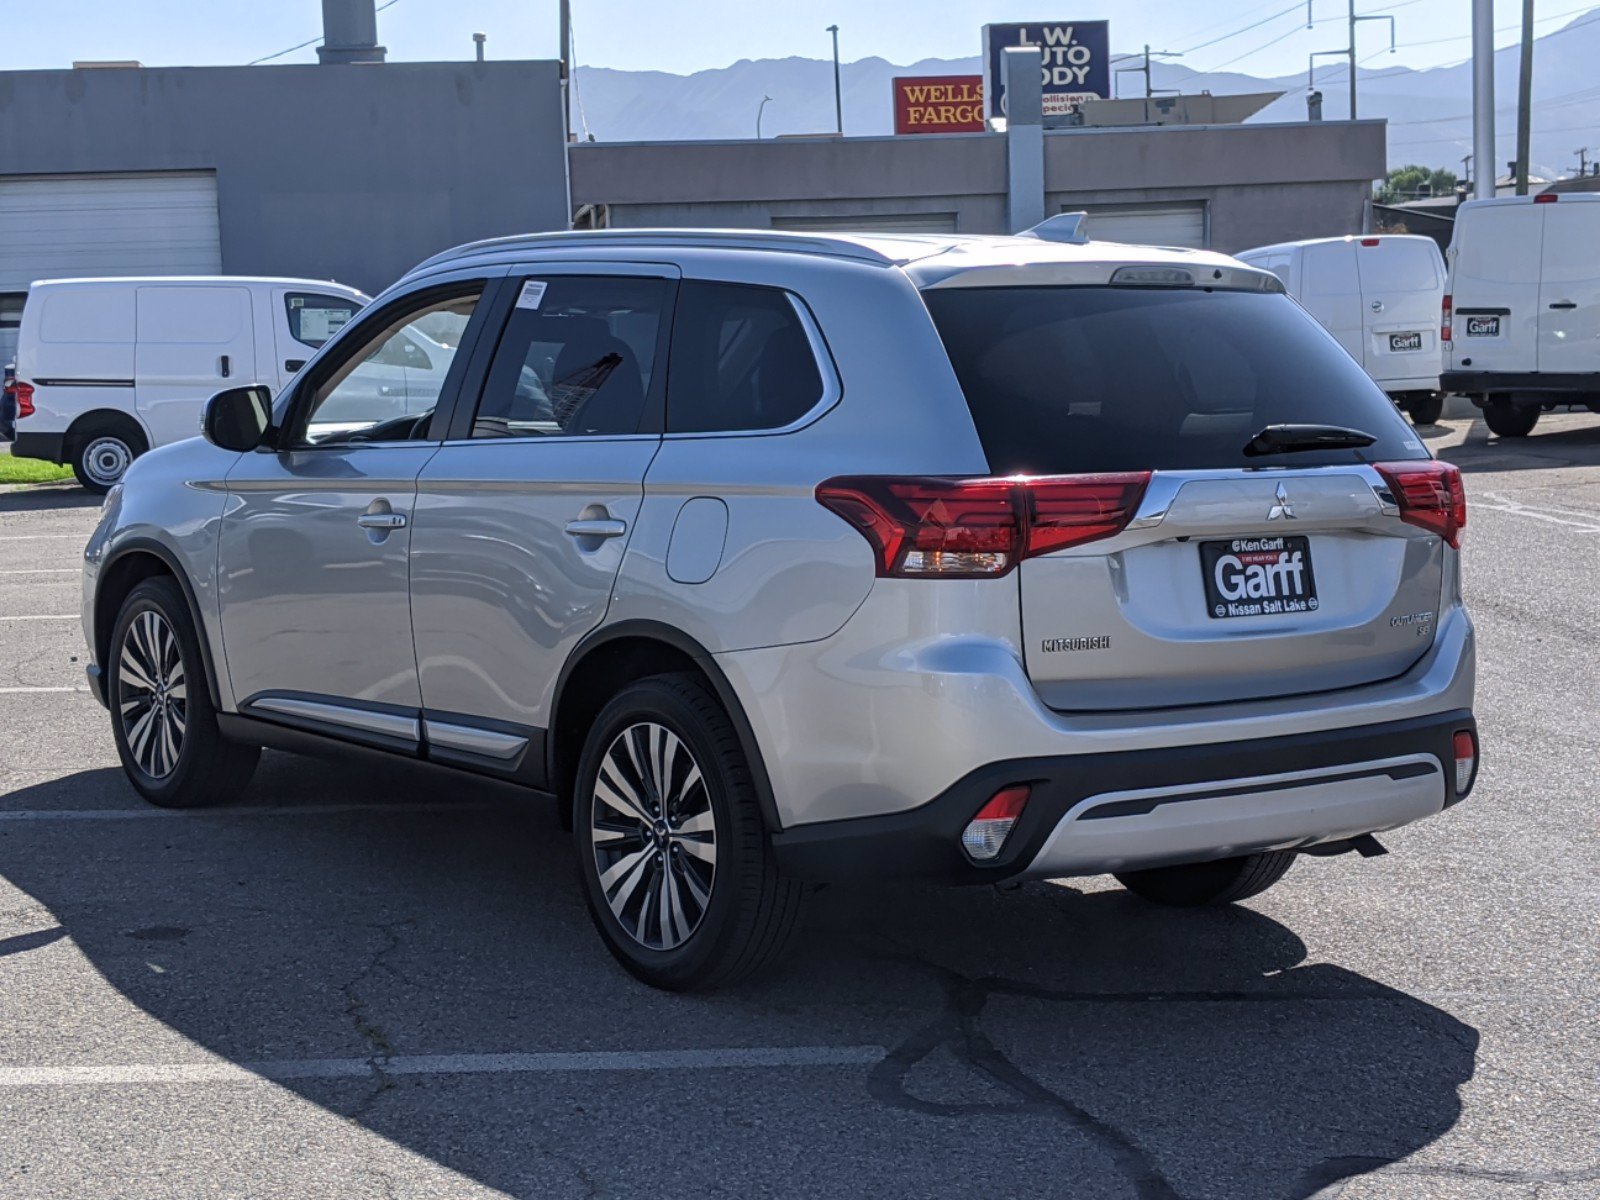 PreOwned 2019 Mitsubishi Outlander SEL Sport Utility in